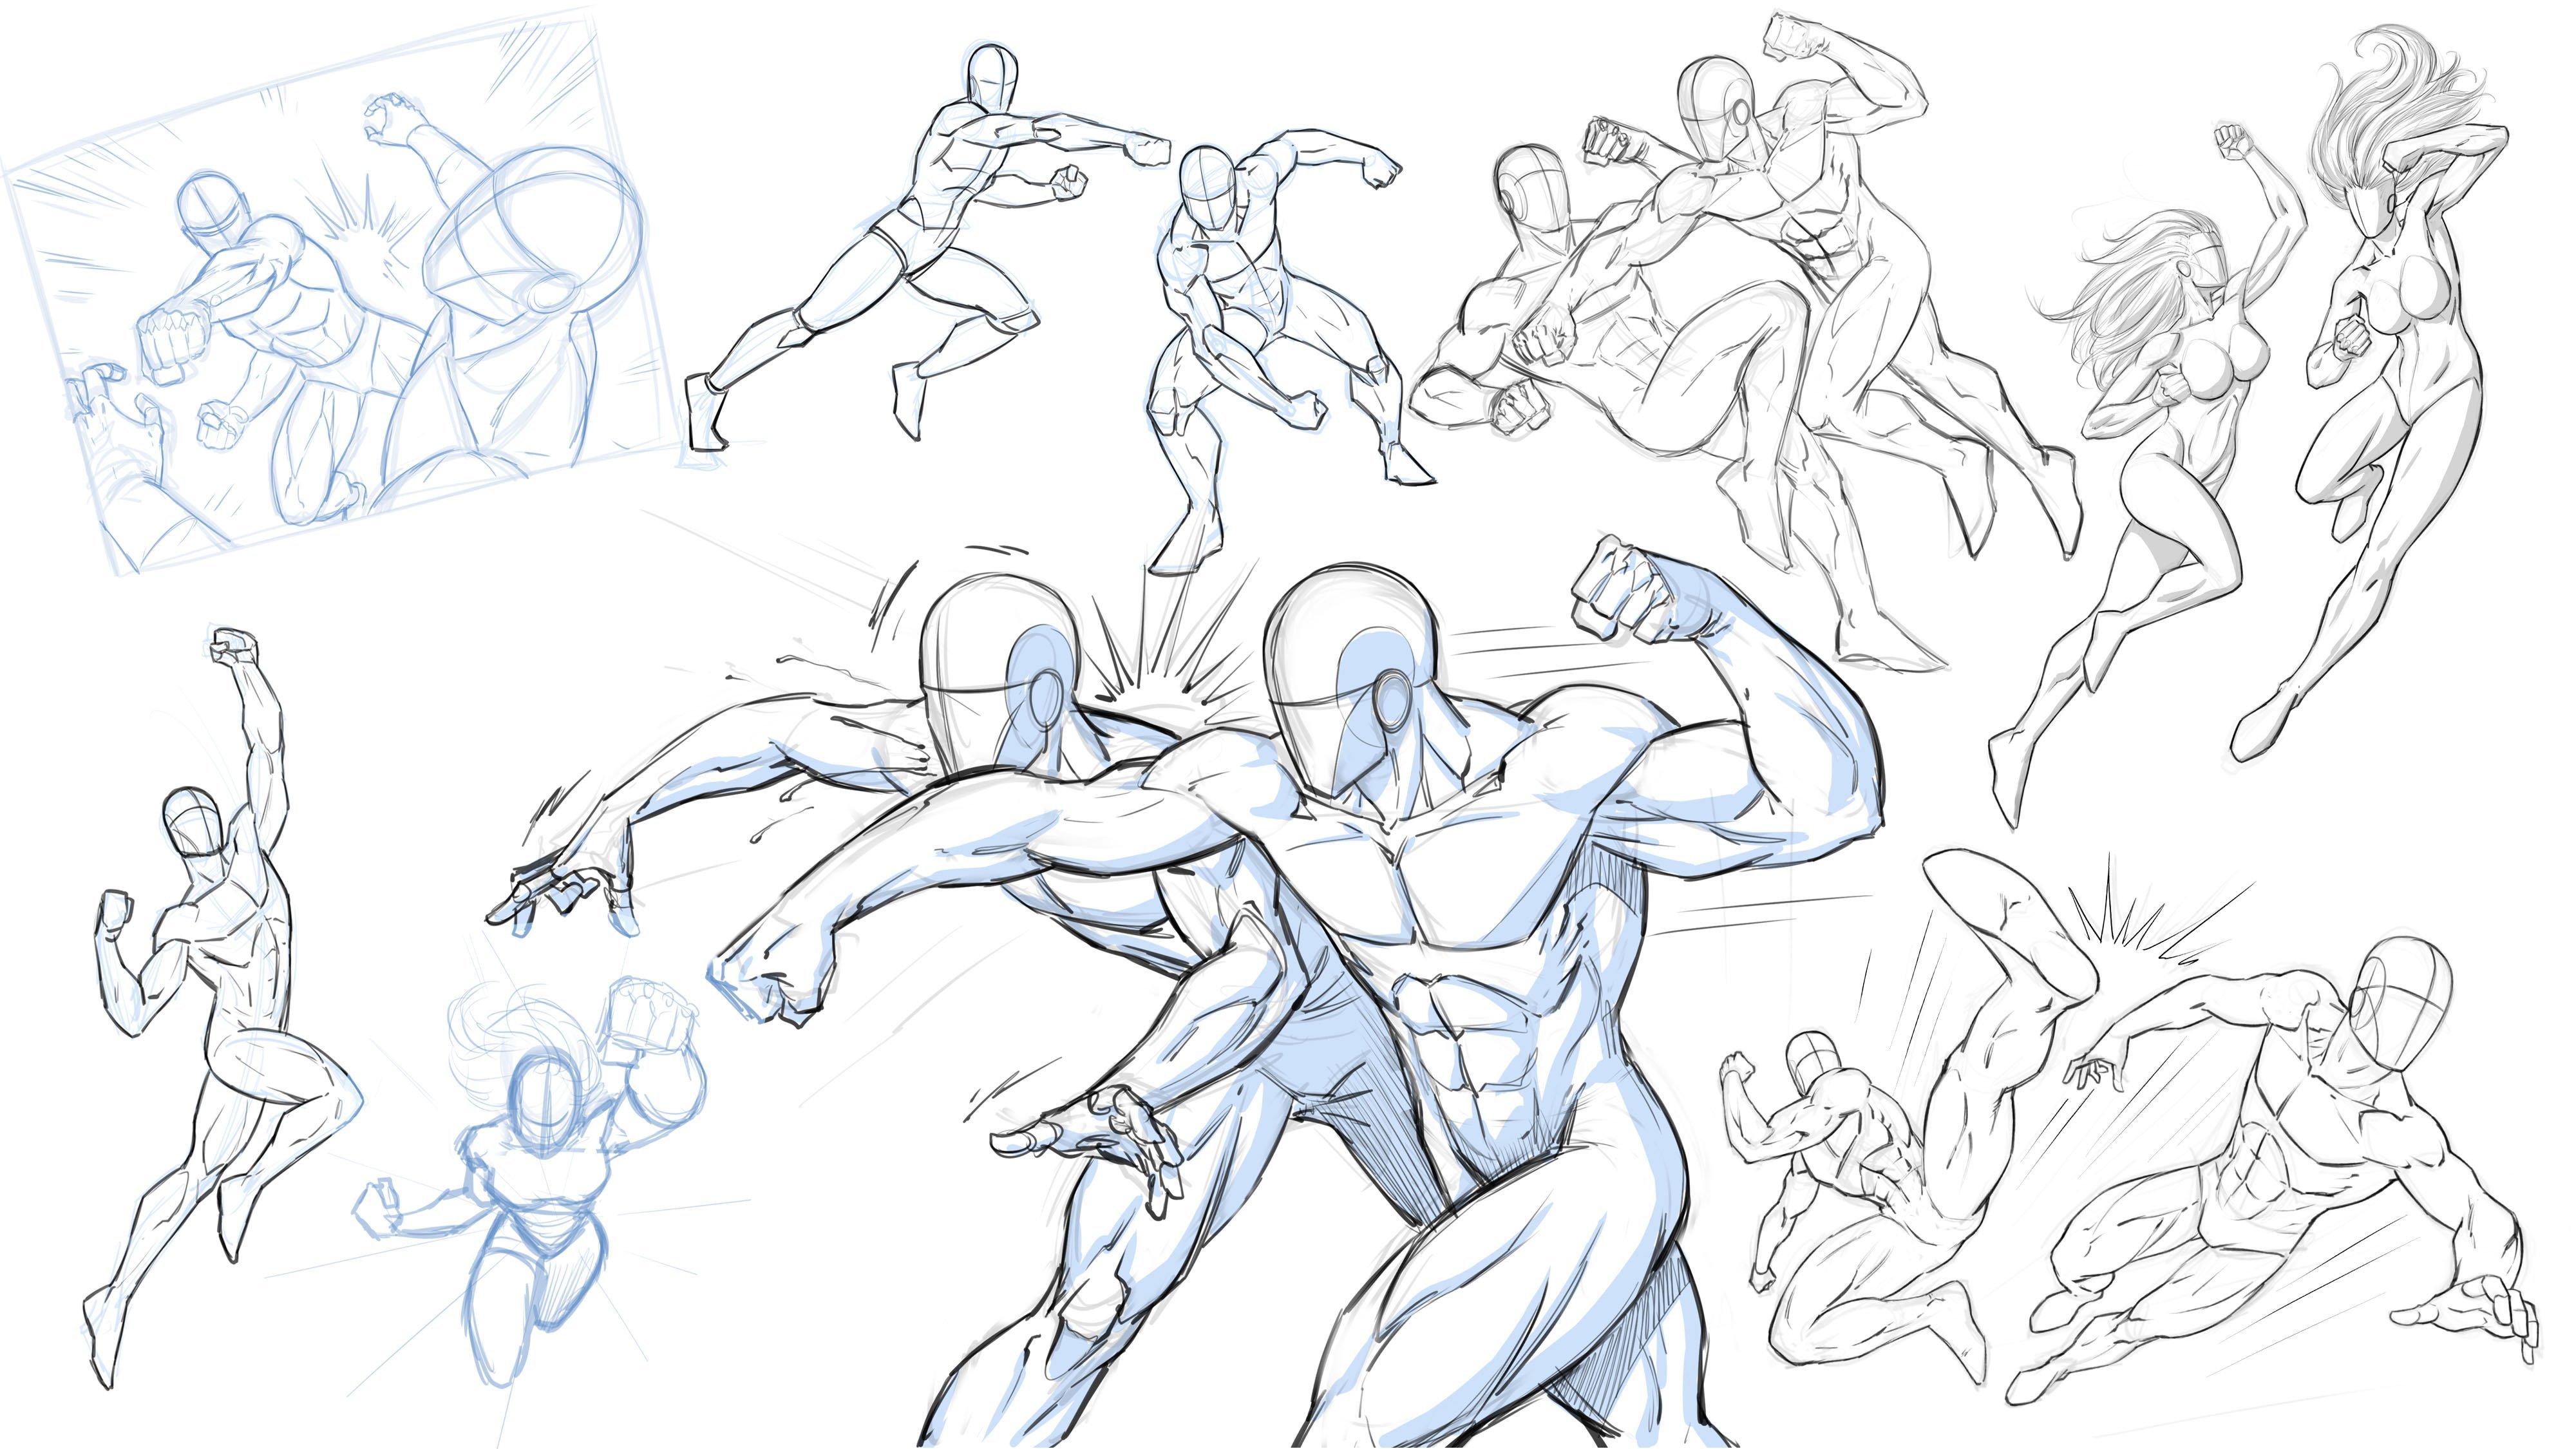 How to draw fight scenes for ics robert marzullo